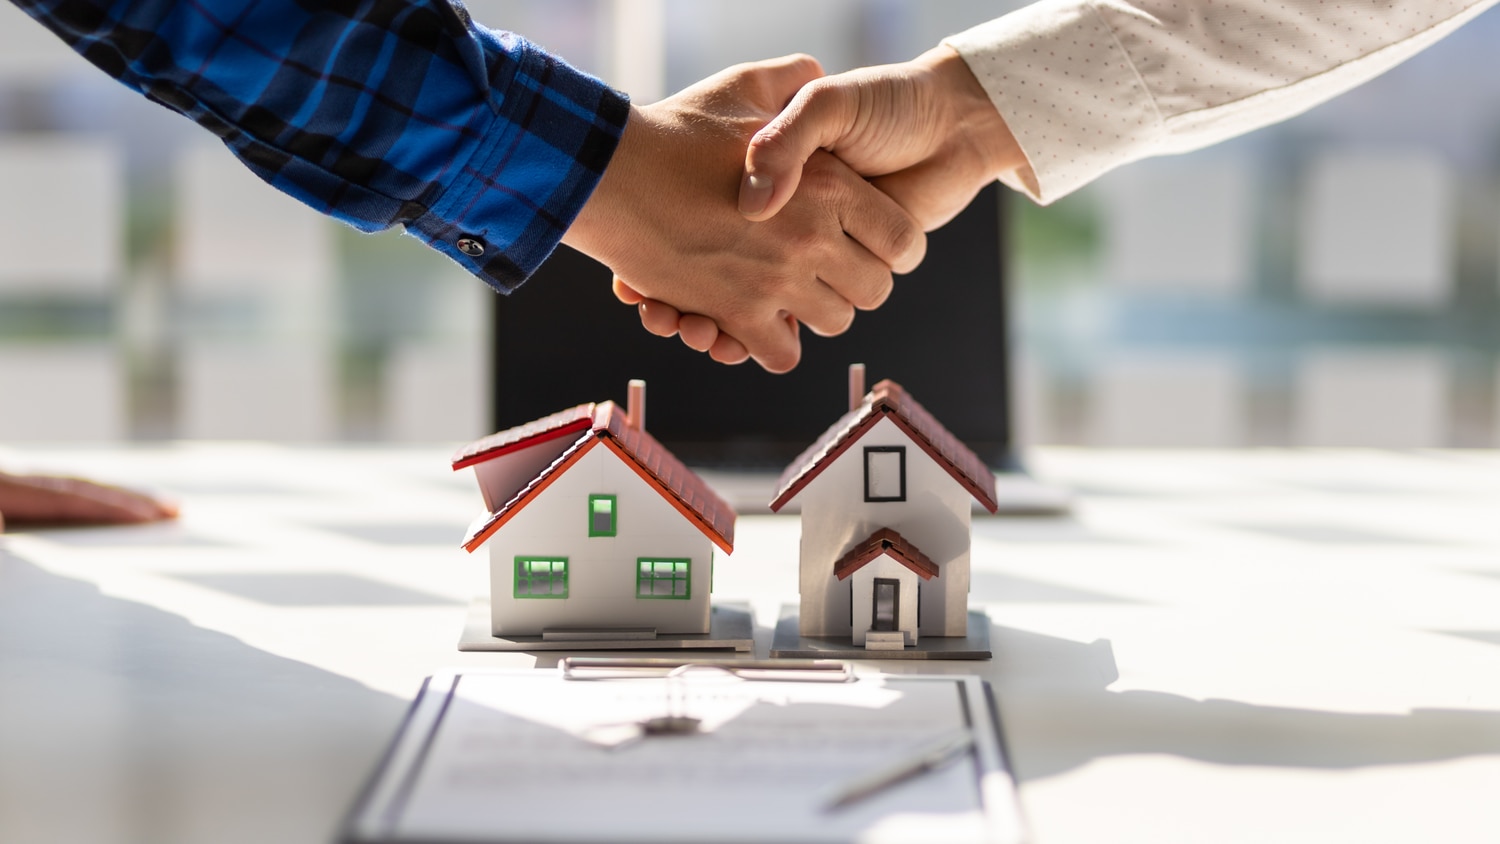 Shaking hands over a home contract